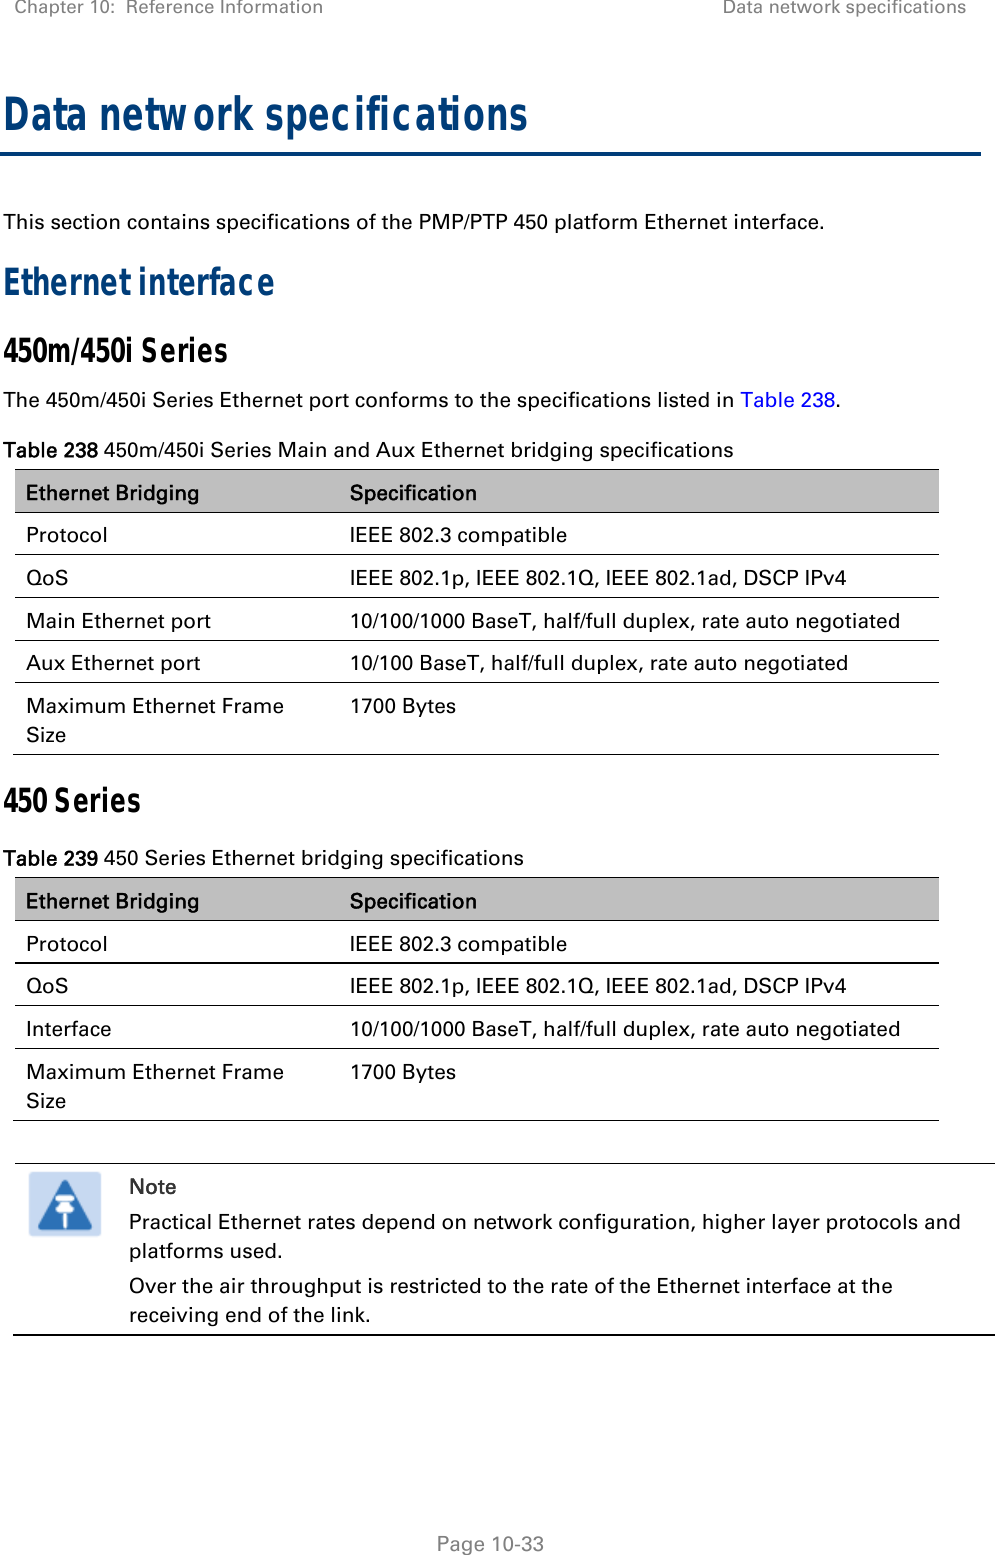 Chapter 10:  Reference Information  Data network specifications   Page 10-33 Data network specifications This section contains specifications of the PMP/PTP 450 platform Ethernet interface. Ethernet interface 450m/450i Series  The 450m/450i Series Ethernet port conforms to the specifications listed in Table 238. Table 238 450m/450i Series Main and Aux Ethernet bridging specifications Ethernet Bridging   Specification Protocol   IEEE 802.3 compatible QoS  IEEE 802.1p, IEEE 802.1Q, IEEE 802.1ad, DSCP IPv4 Main Ethernet port  10/100/1000 BaseT, half/full duplex, rate auto negotiated Aux Ethernet port  10/100 BaseT, half/full duplex, rate auto negotiated Maximum Ethernet Frame Size 1700 Bytes 450 Series Table 239 450 Series Ethernet bridging specifications Ethernet Bridging   Specification Protocol   IEEE 802.3 compatible QoS  IEEE 802.1p, IEEE 802.1Q, IEEE 802.1ad, DSCP IPv4 Interface   10/100/1000 BaseT, half/full duplex, rate auto negotiated Maximum Ethernet Frame Size 1700 Bytes   Note Practical Ethernet rates depend on network configuration, higher layer protocols and platforms used. Over the air throughput is restricted to the rate of the Ethernet interface at the receiving end of the link.    